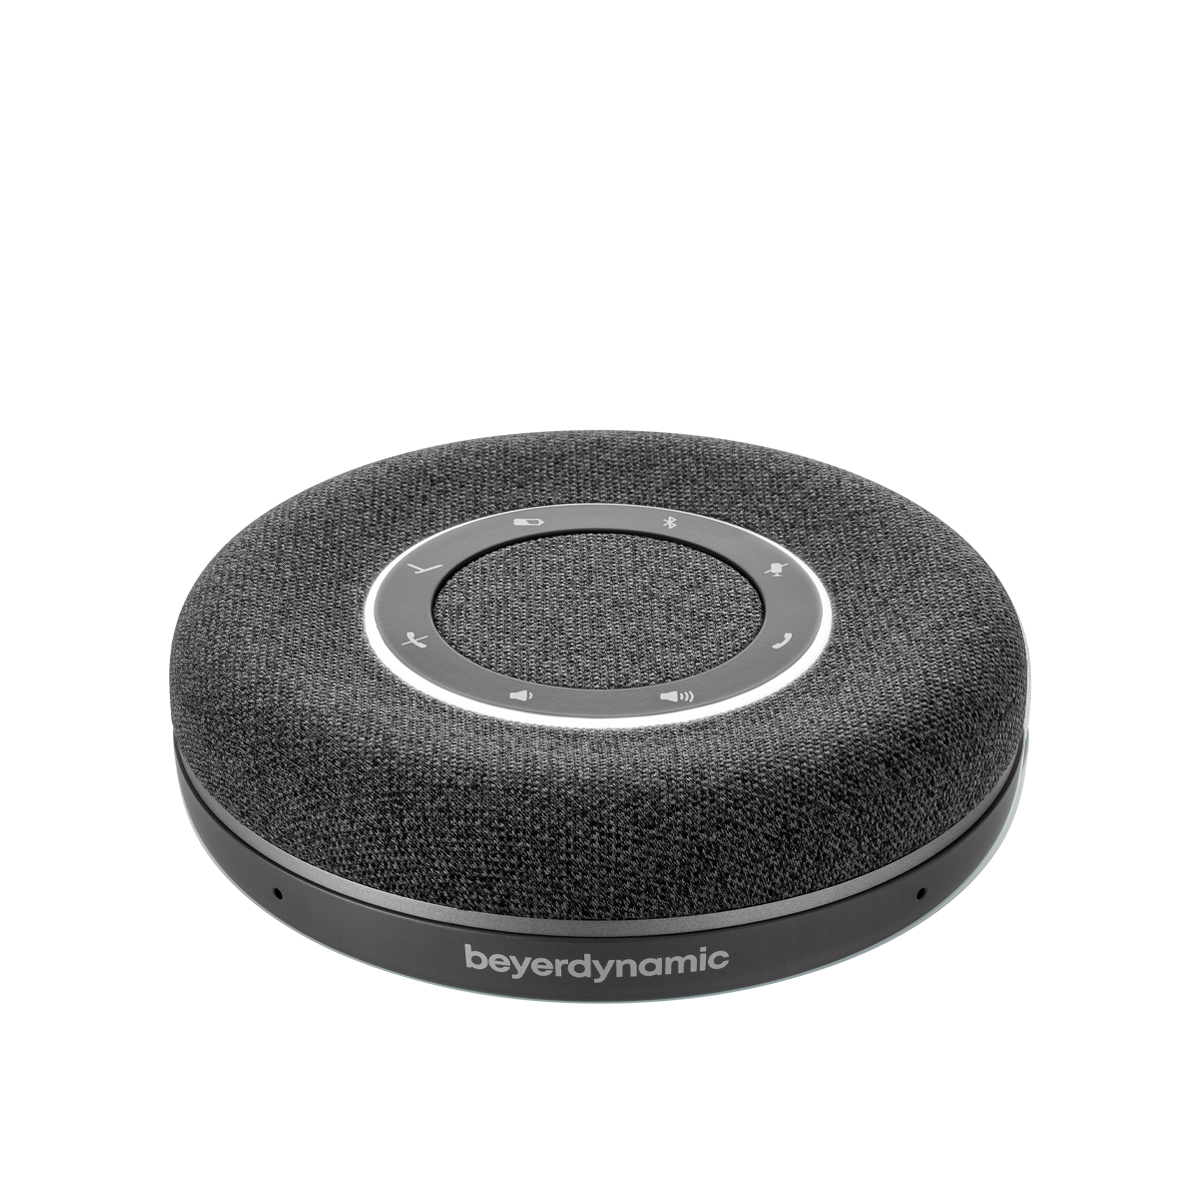 beyerdynamic-space-charcoal-light-perspective_transparent_1 (2).png